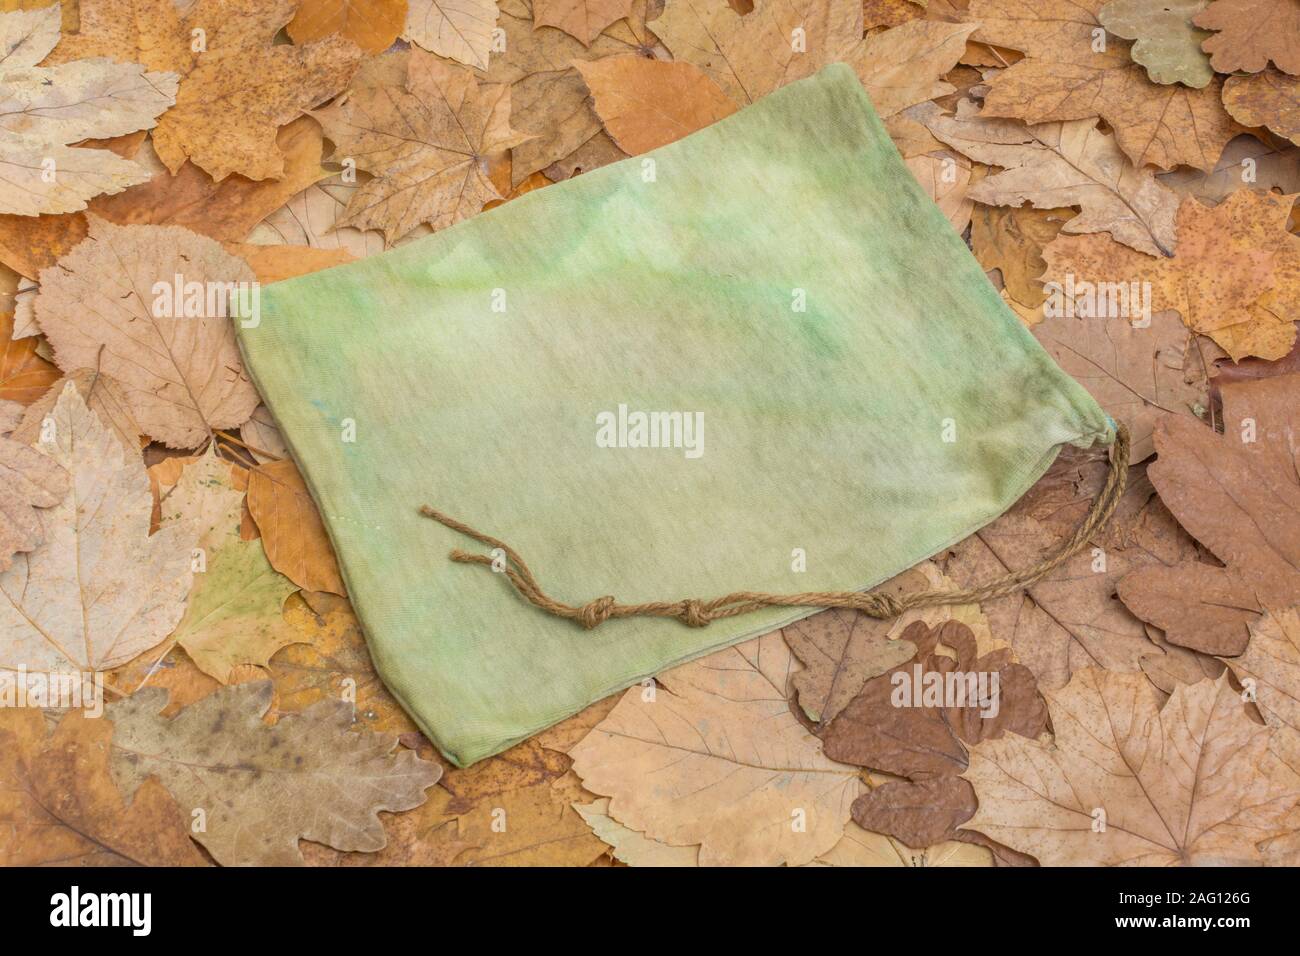 Small rustic possibles bag / ditty bag on floor of autumnal leaves. Metaphor survival skills, survival knowledge, bushcraft. Stock Photo